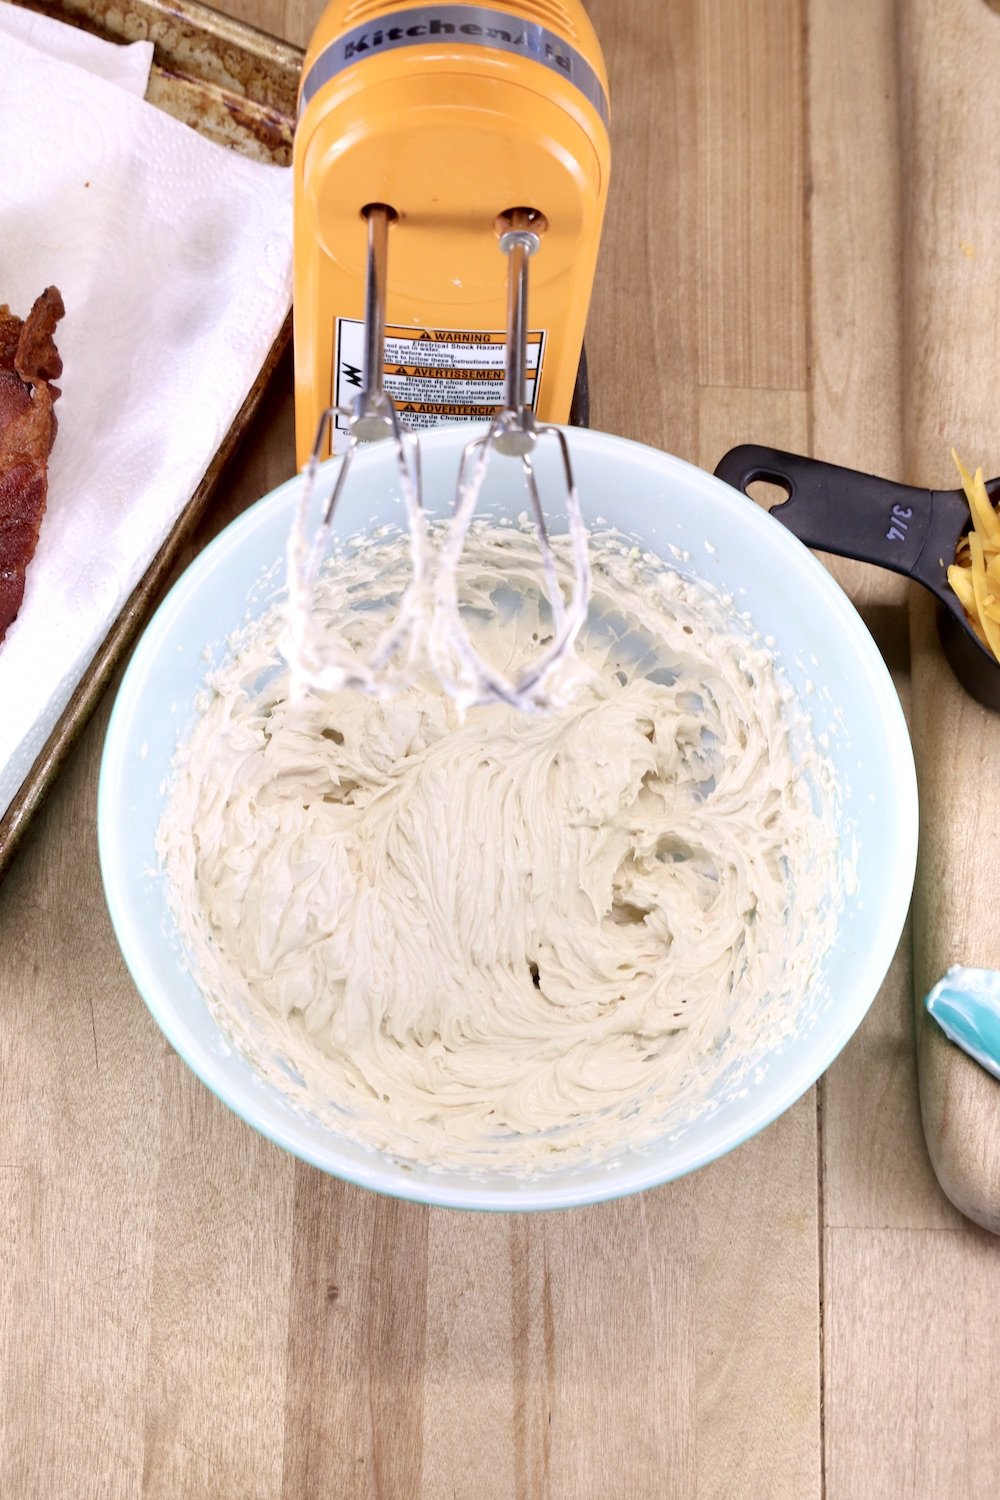 Cream cheese mixture whipped in a bowl until creamy, orange hand mixer with the bowl